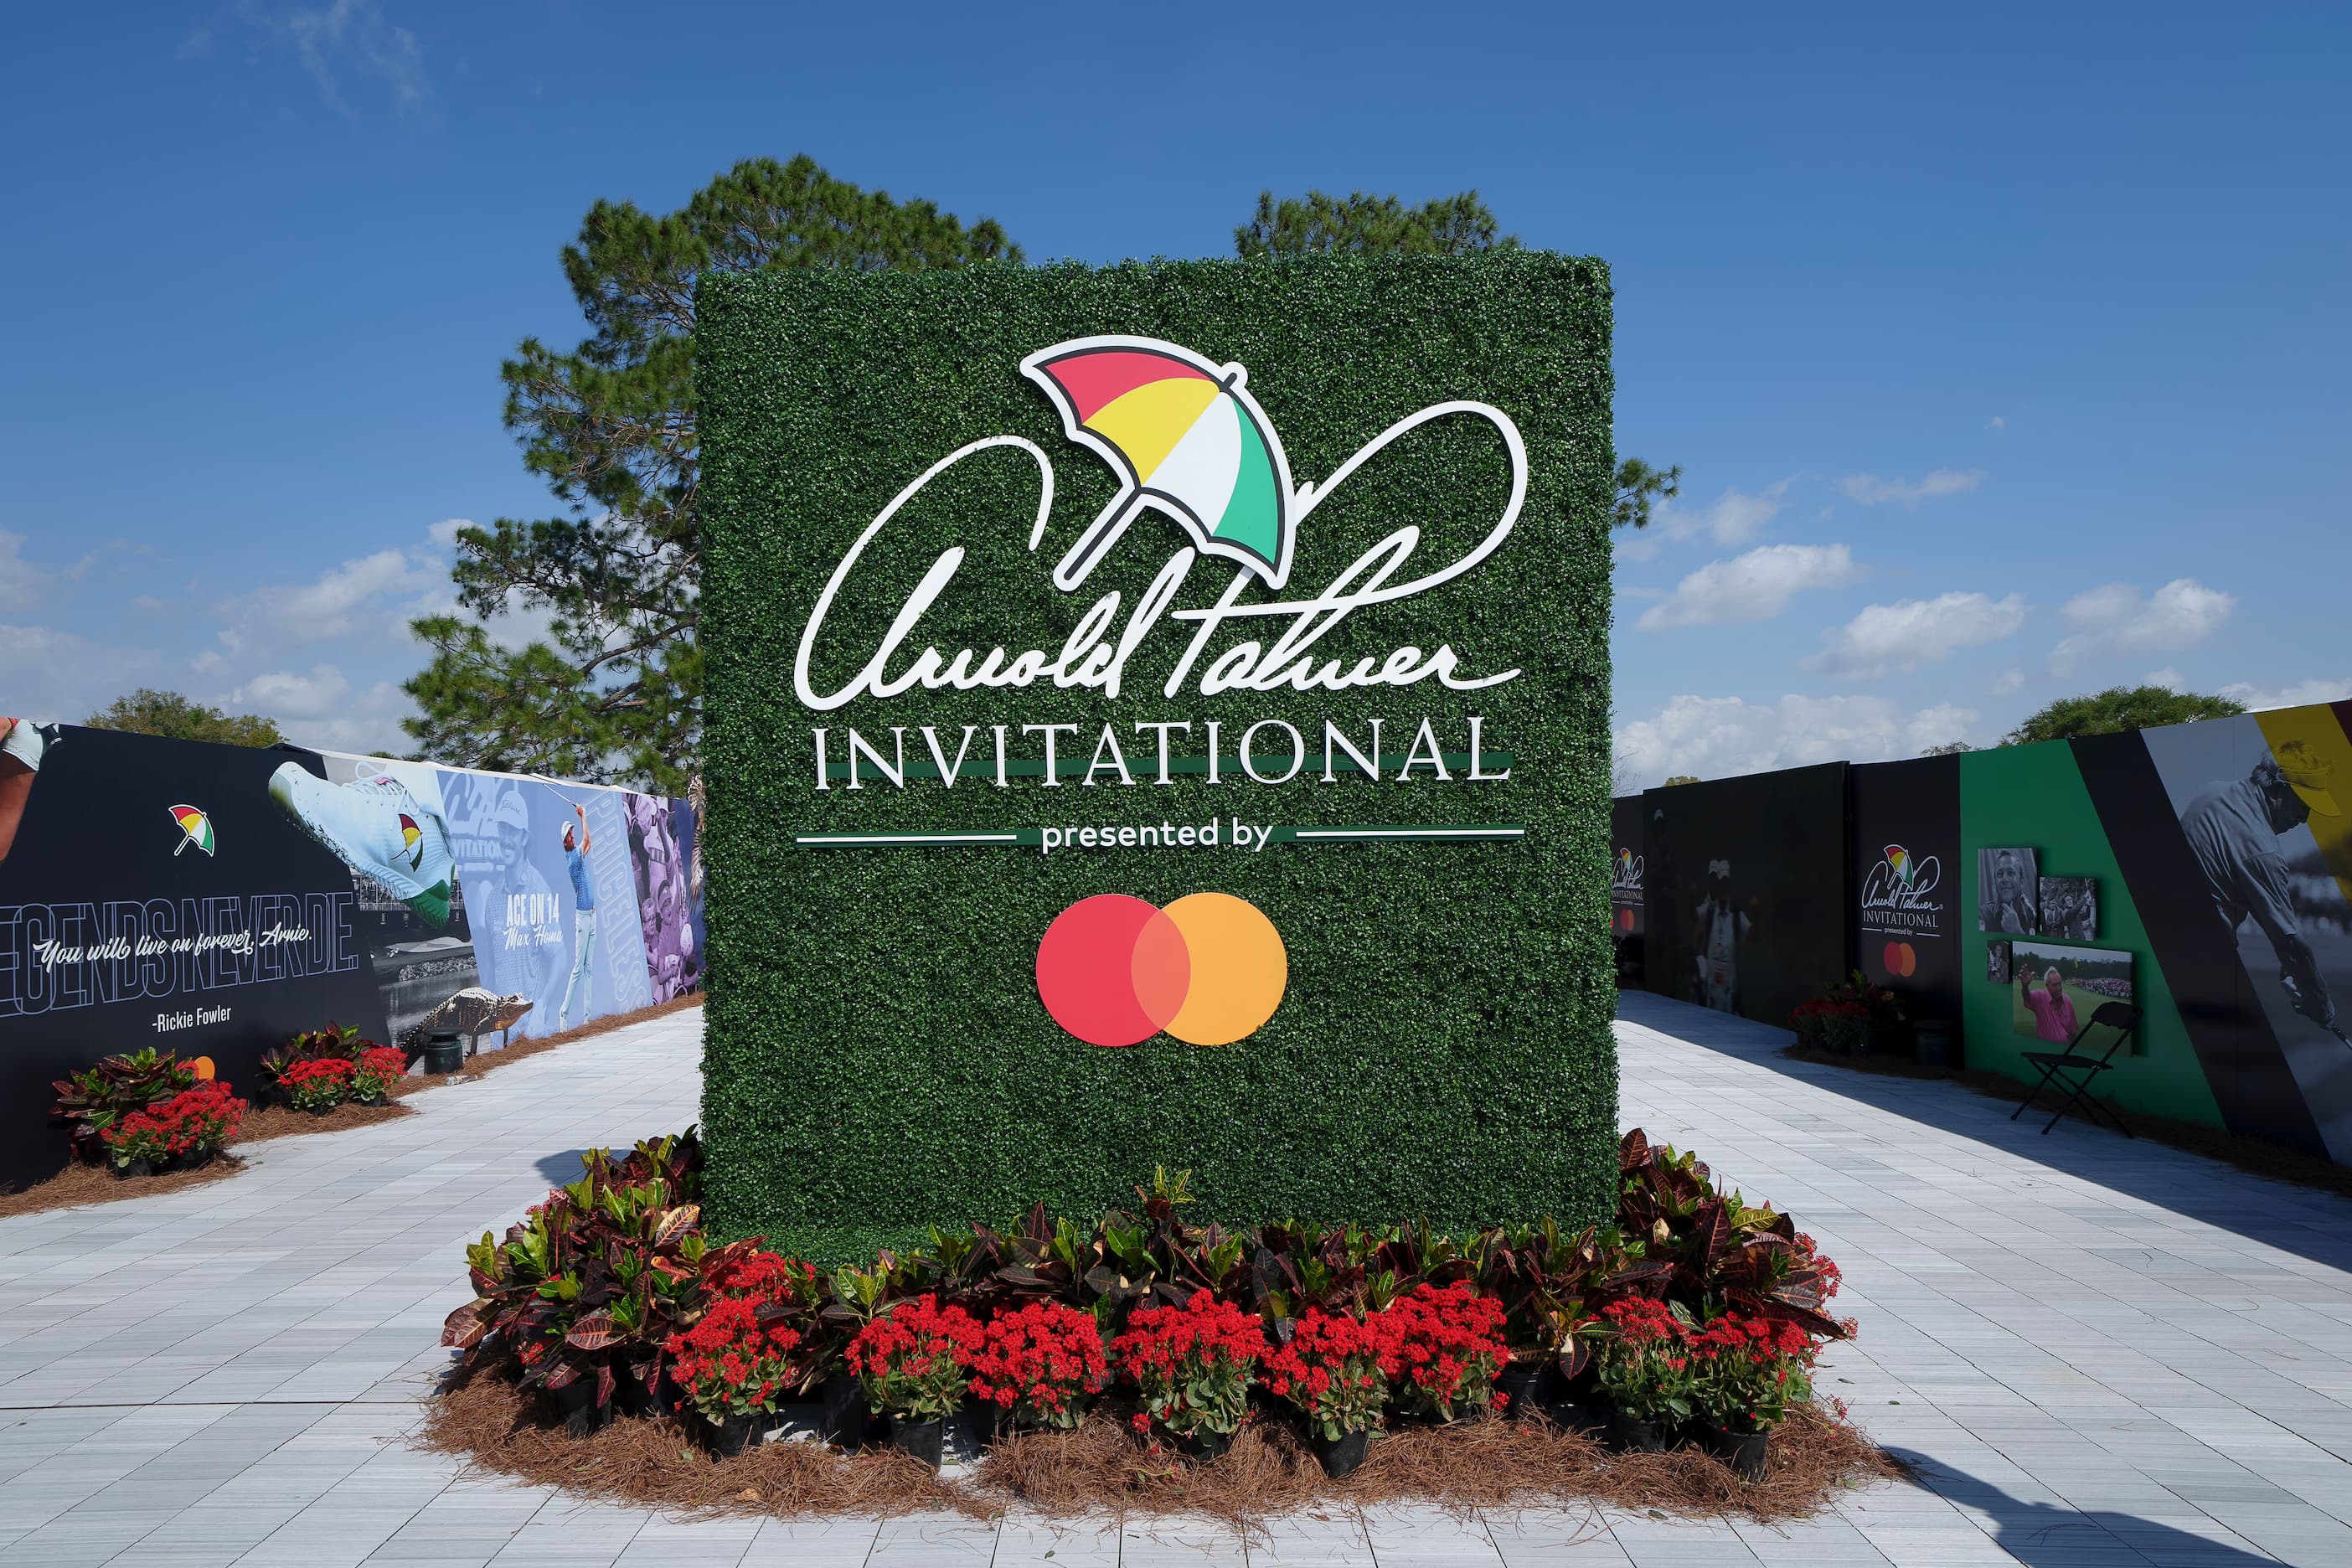 Sign of Arnold Palmer Invitational presented by Mastercard